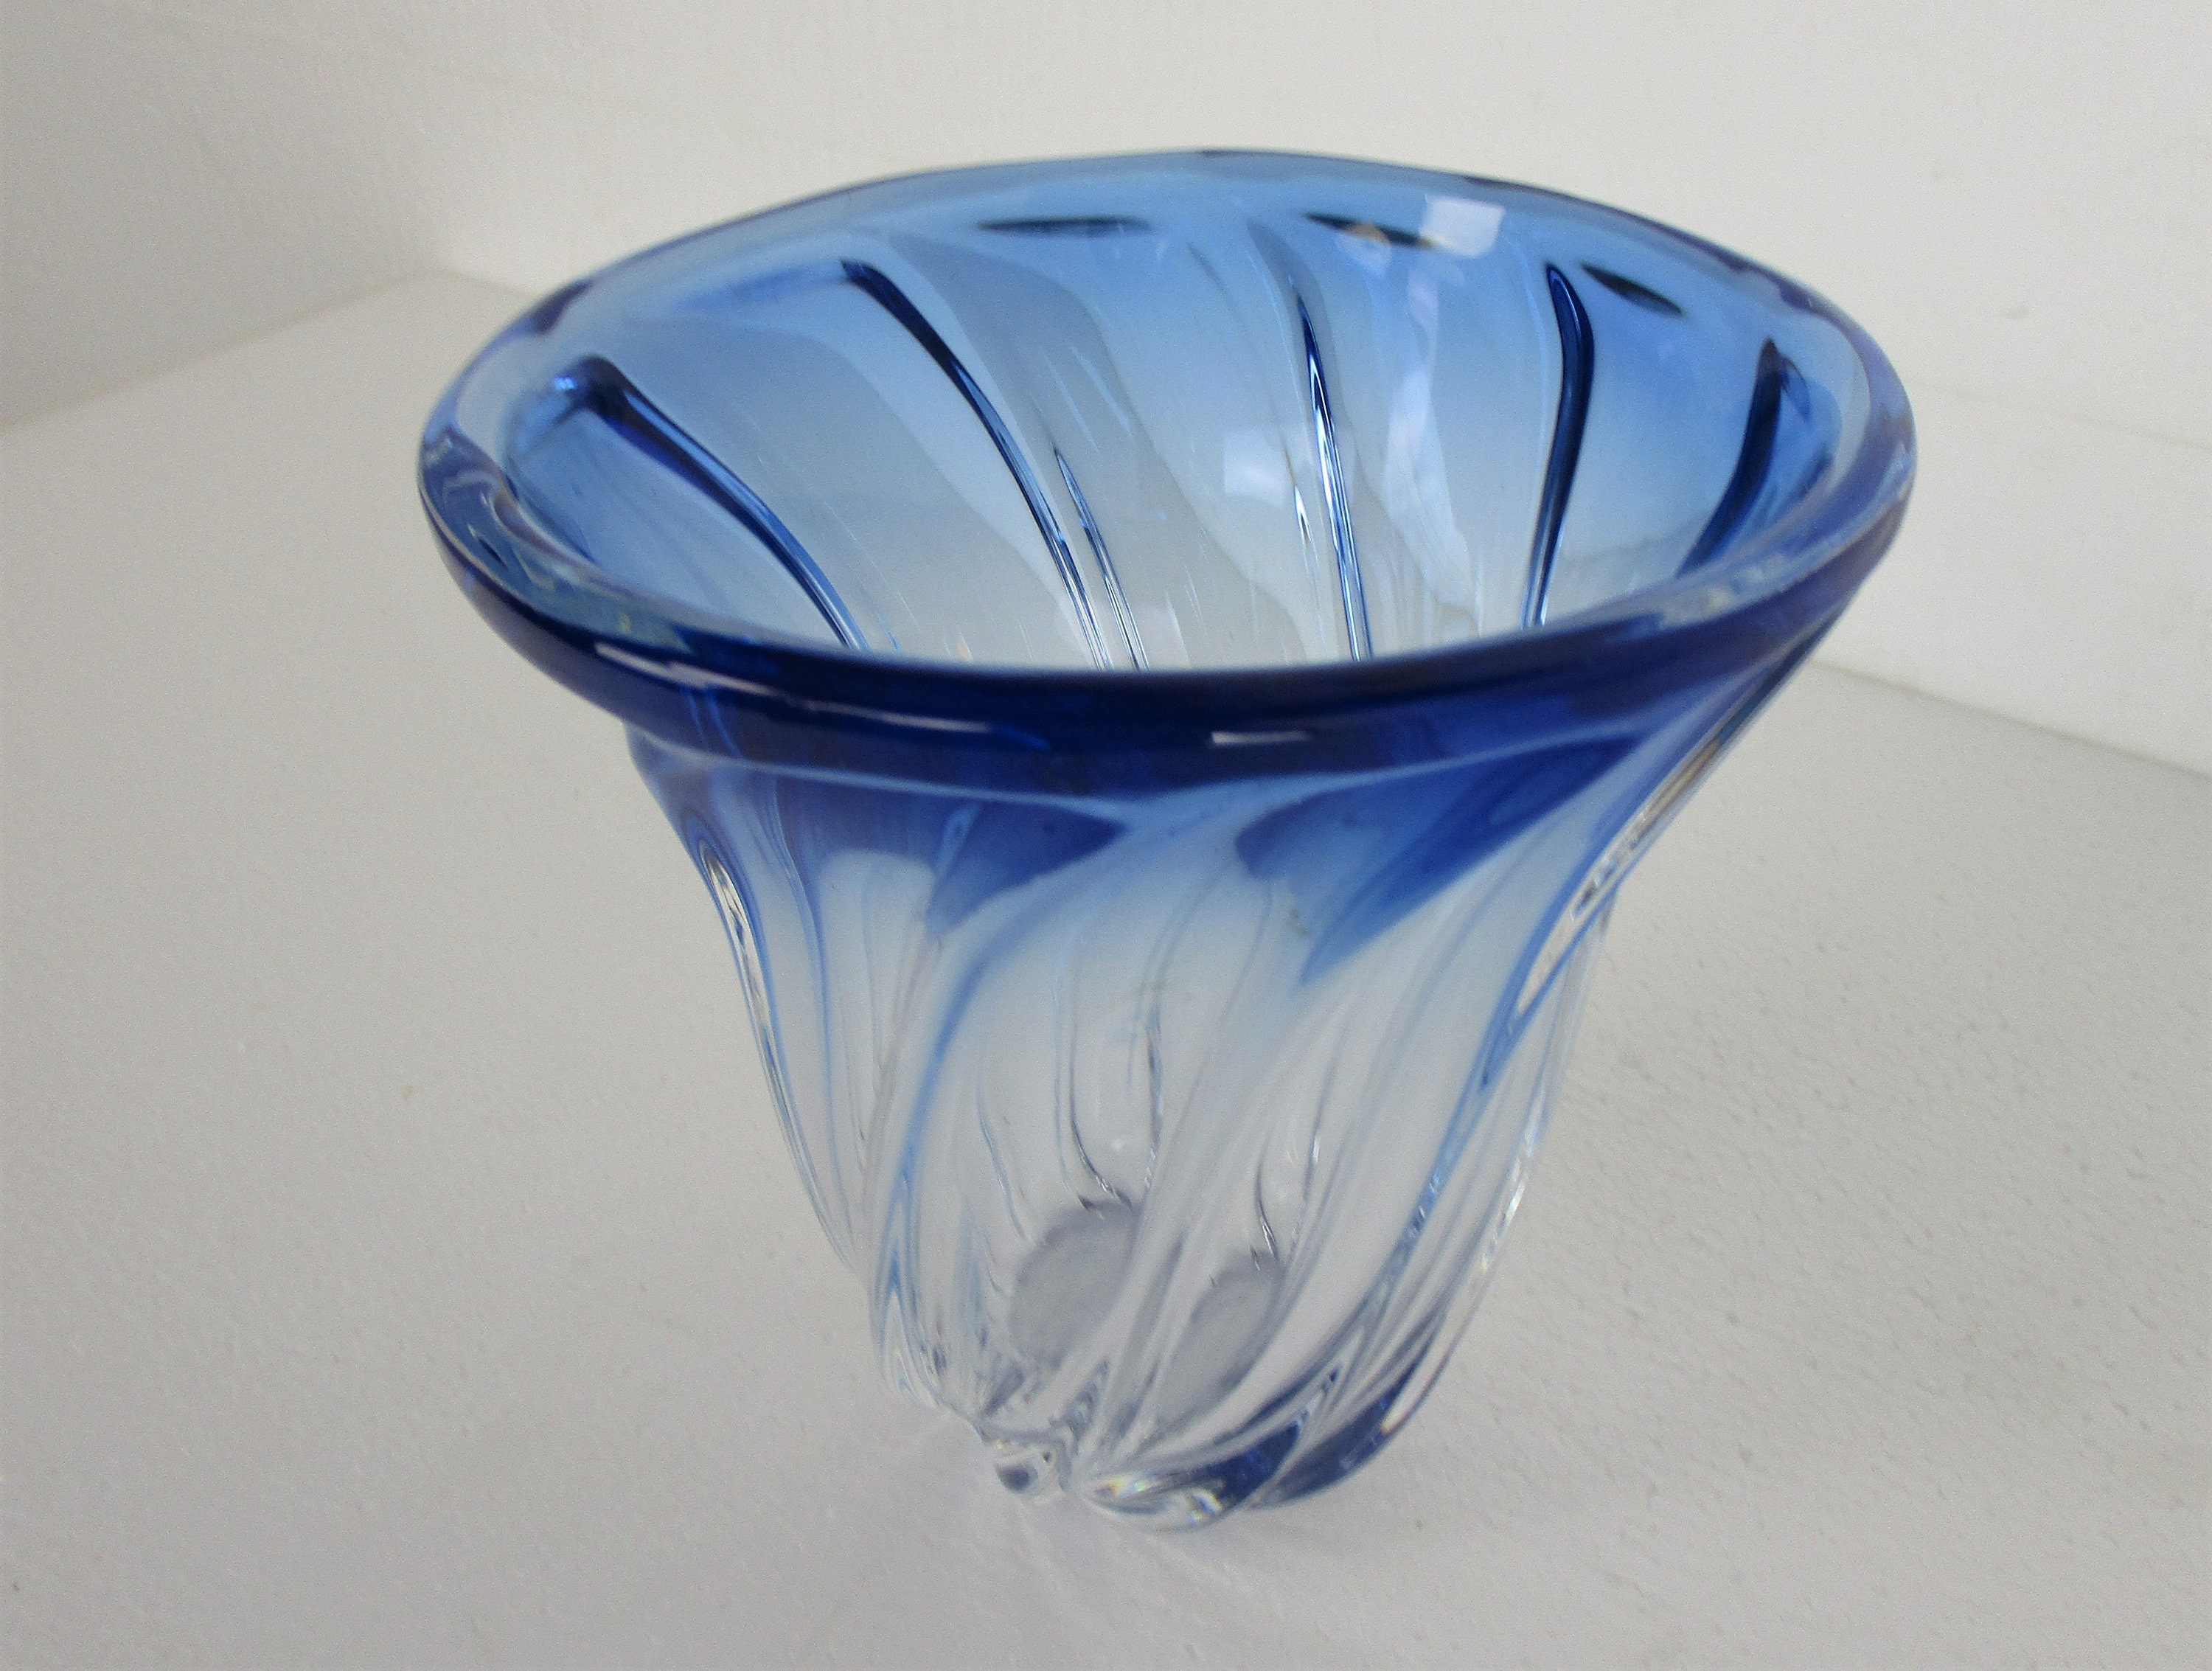 Clear Twisted to Lambert - art Blue glass in Heavy Marked Art St Cobalt House the Vase Collectors Deco Glass Val